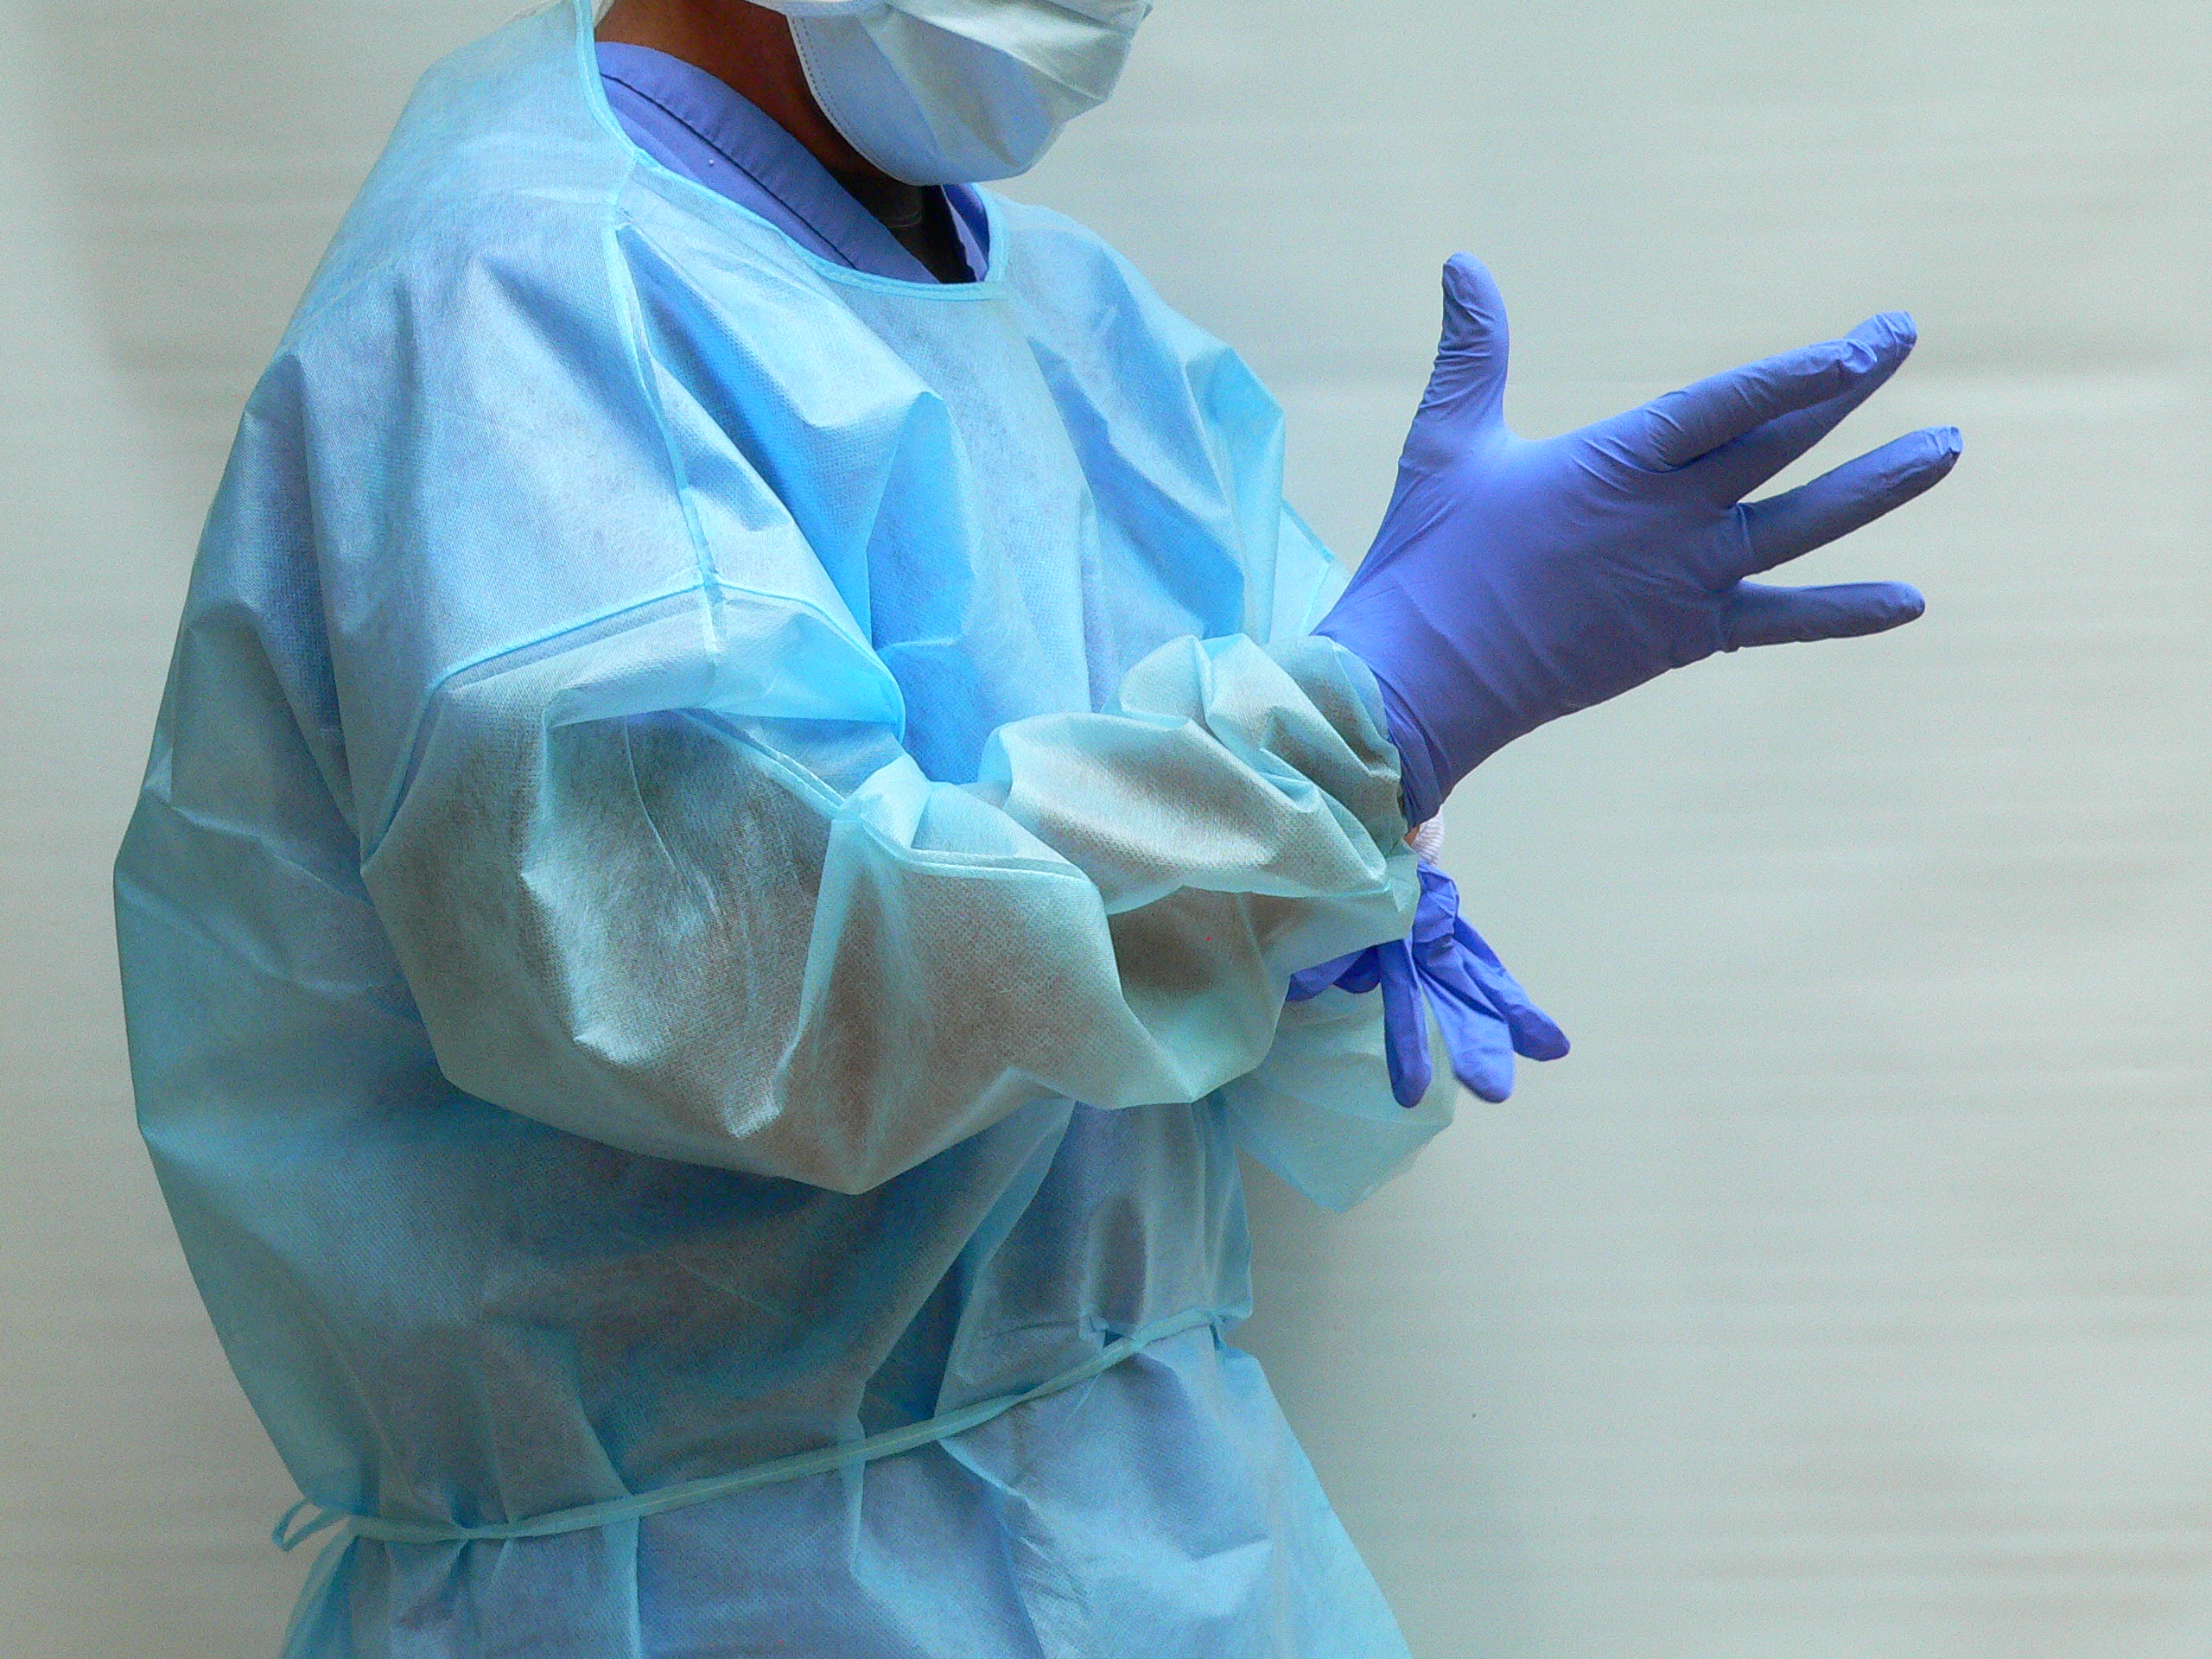 Disposable PE coated level 2 isolation gowns with knit cuffs. Blue color.